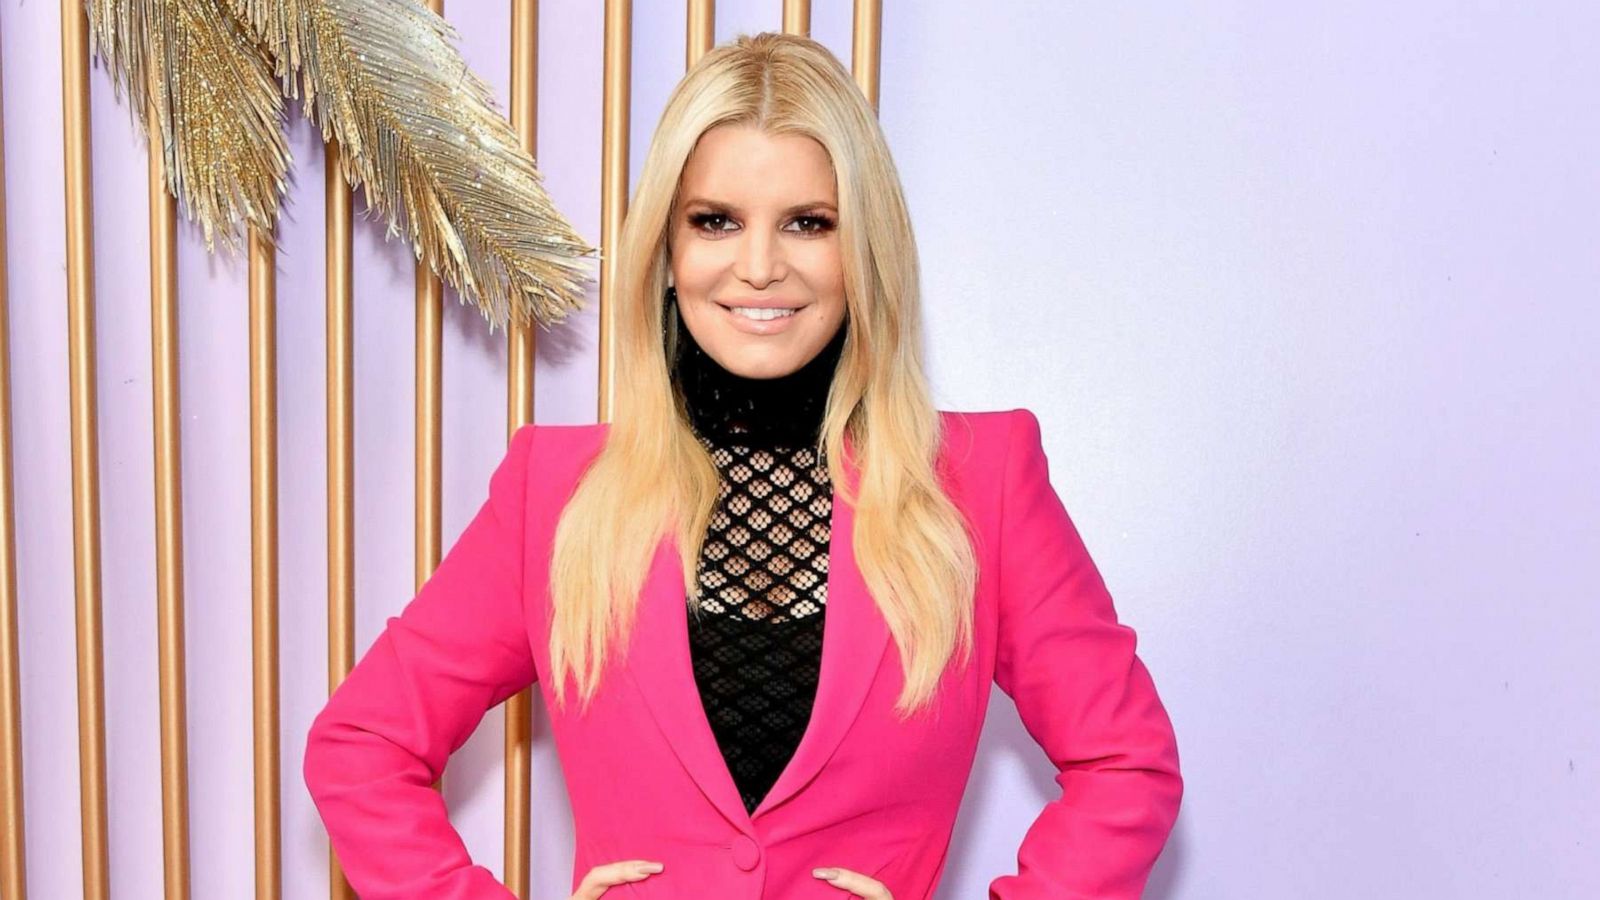 Jessica Simpson nearly eliminated her biggest assets